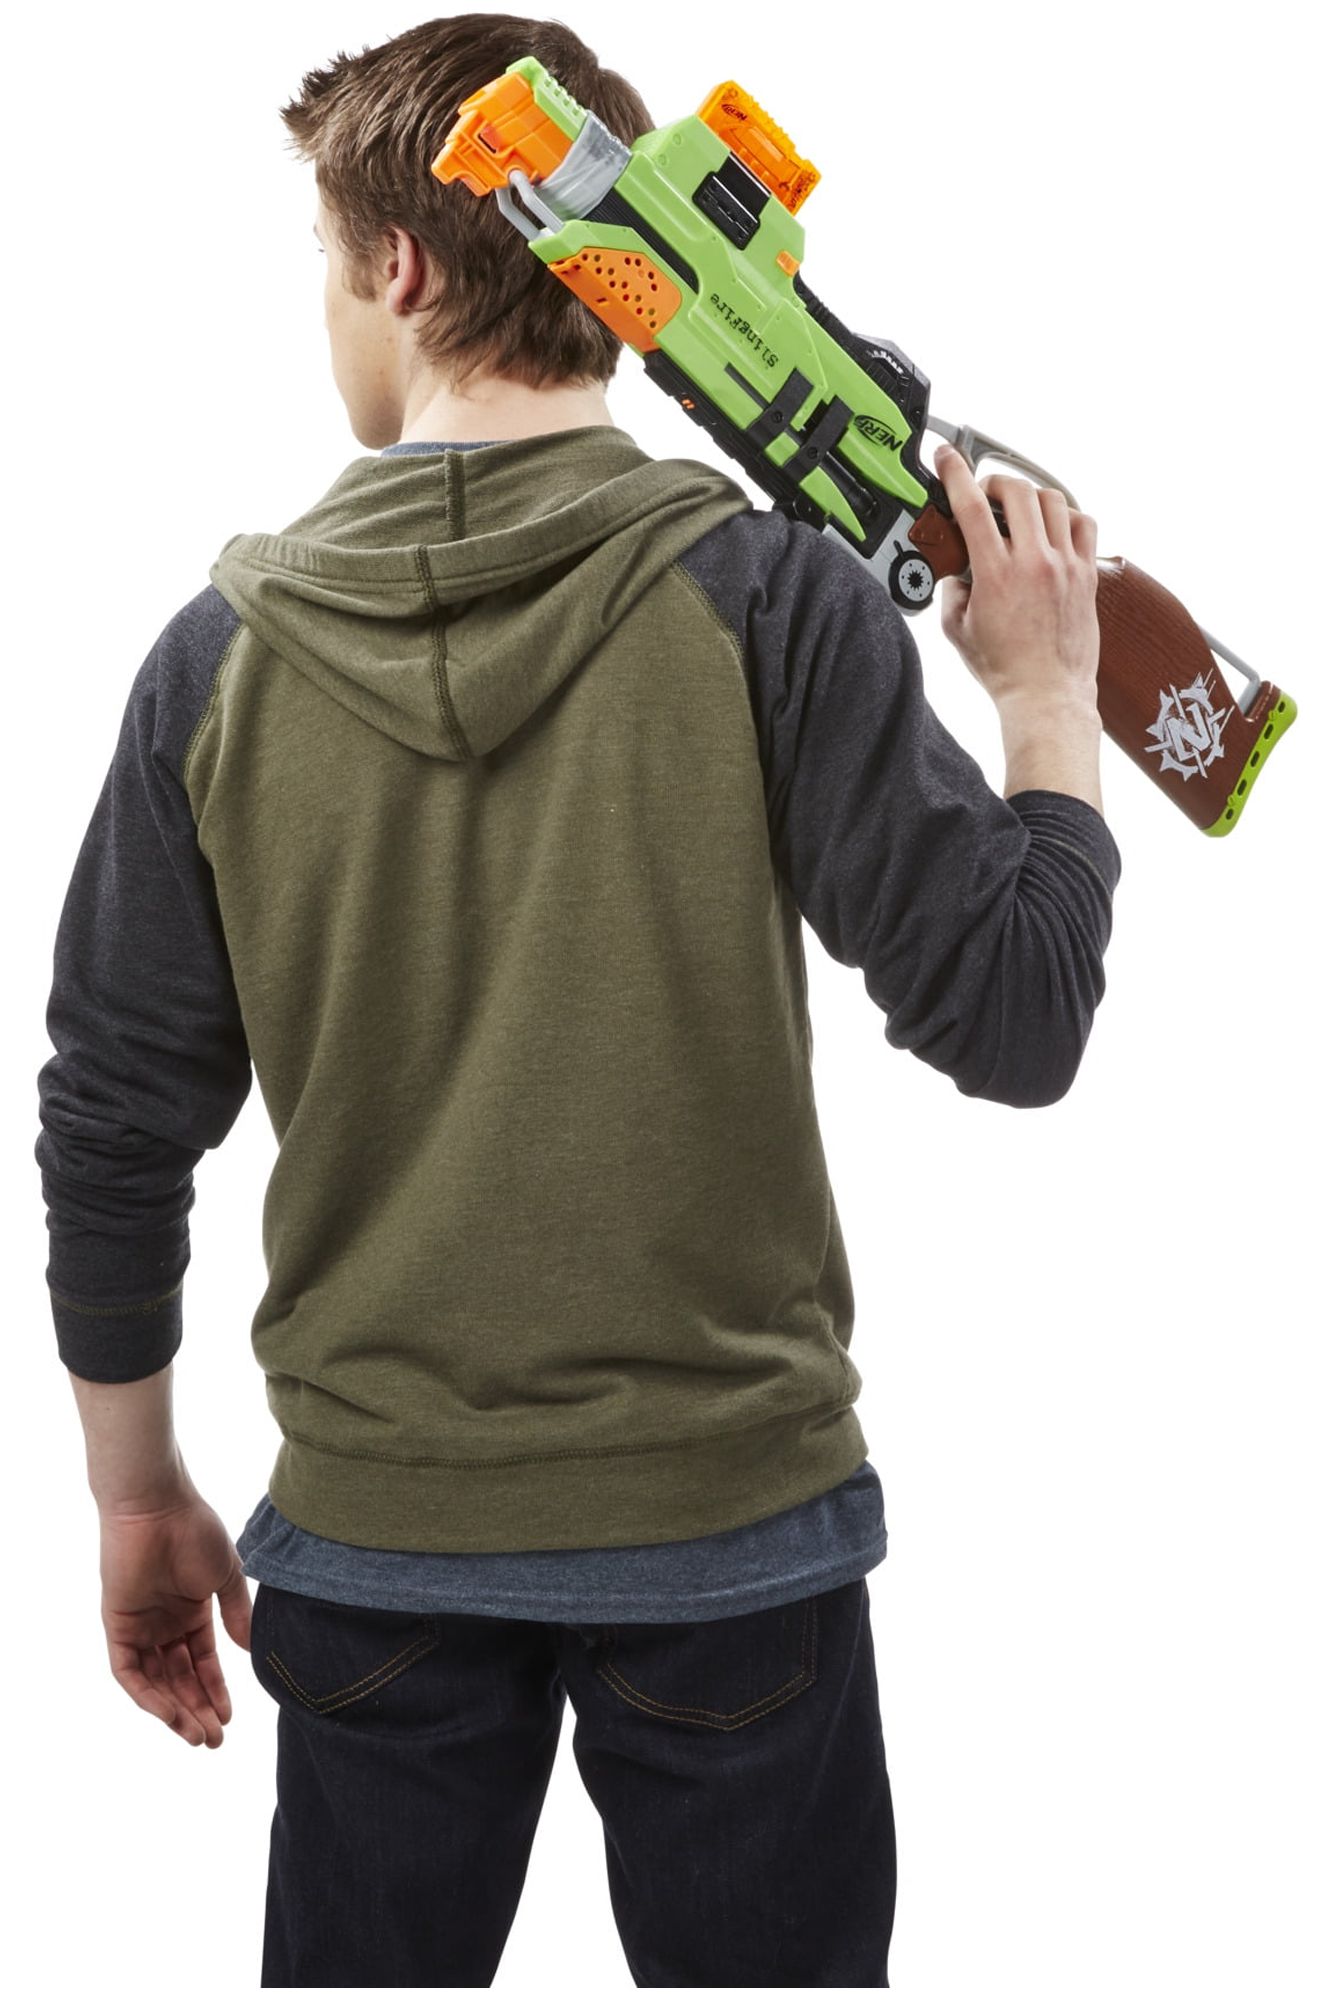 Nerf Zombie Strike SlingFire, for Kids Ages 8 and up - image 5 of 7